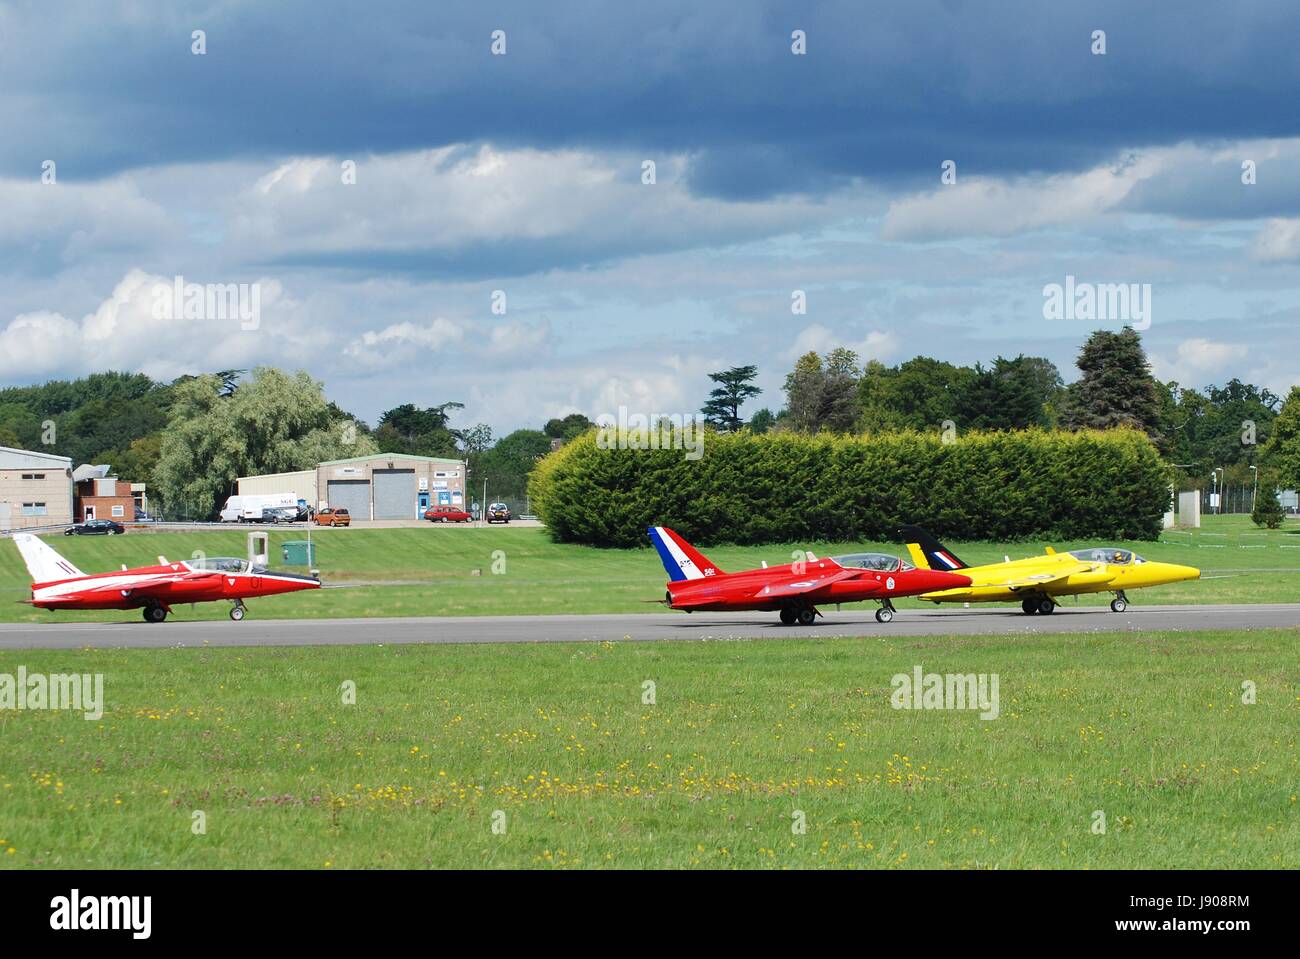 Folland Gnat T Mark 1 XR991 (yellow), XS111 (mid), XR538 (rear) taking off during the Dunsfold airshow at Surrey, England on August 23, 2014. Stock Photo